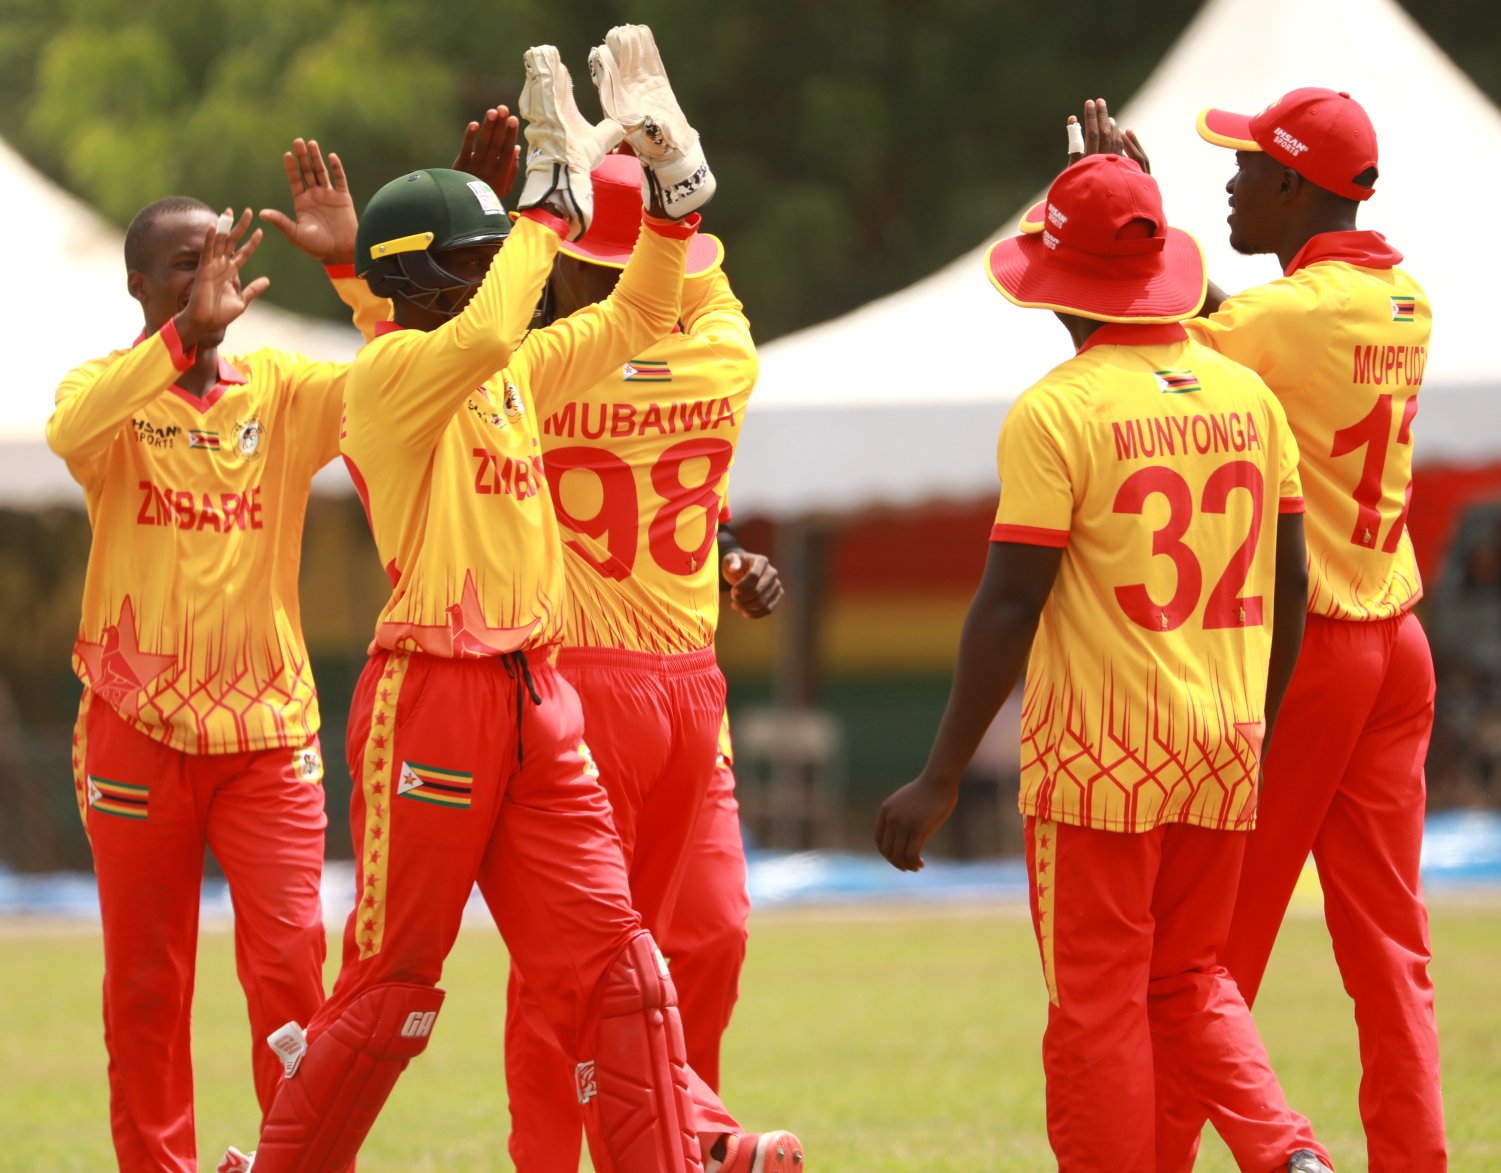 Zimbabwe Storms into African Games Cricket Final with Commanding Victory Over Kenya